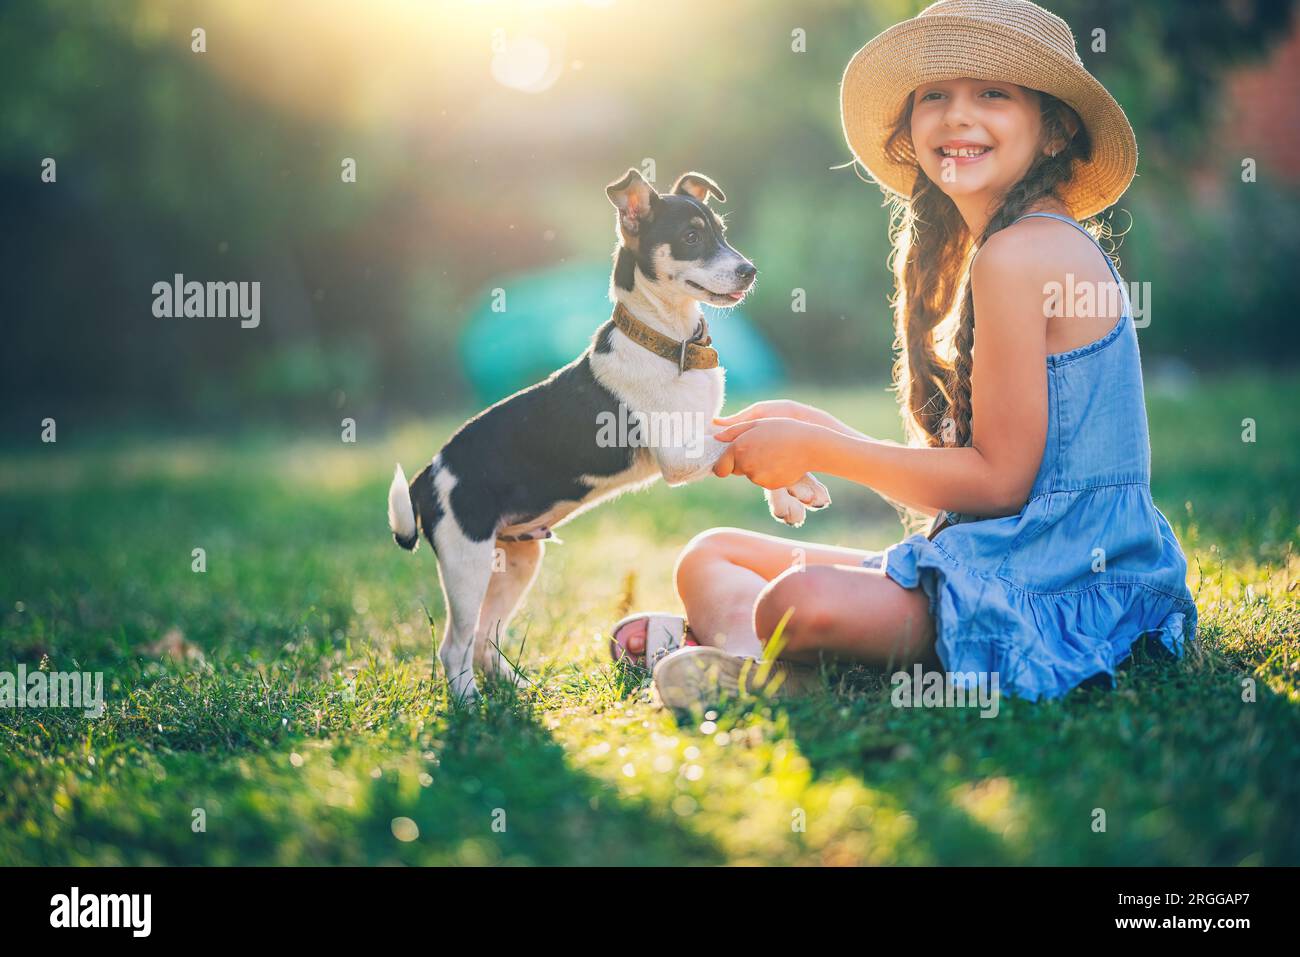 Happy girl playing with cute playful puppy little dog outdoor on a sunny day in a park Stock Photo